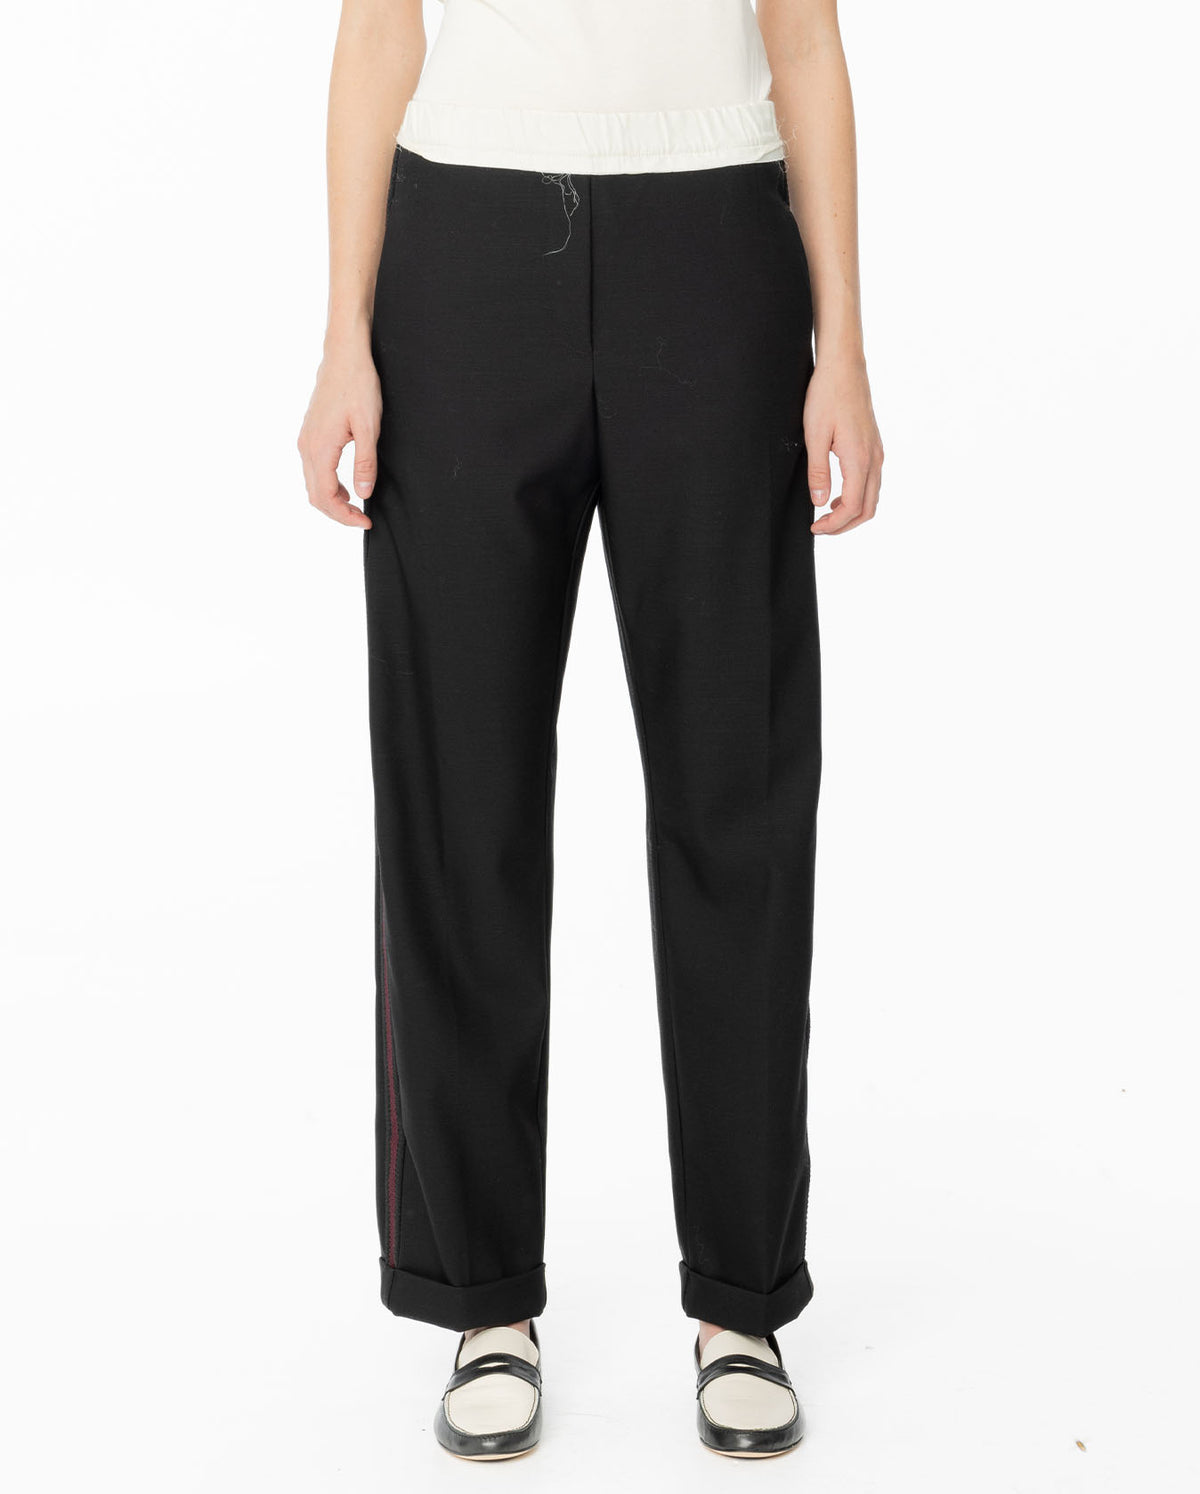 Seine Trousers - Black & Red